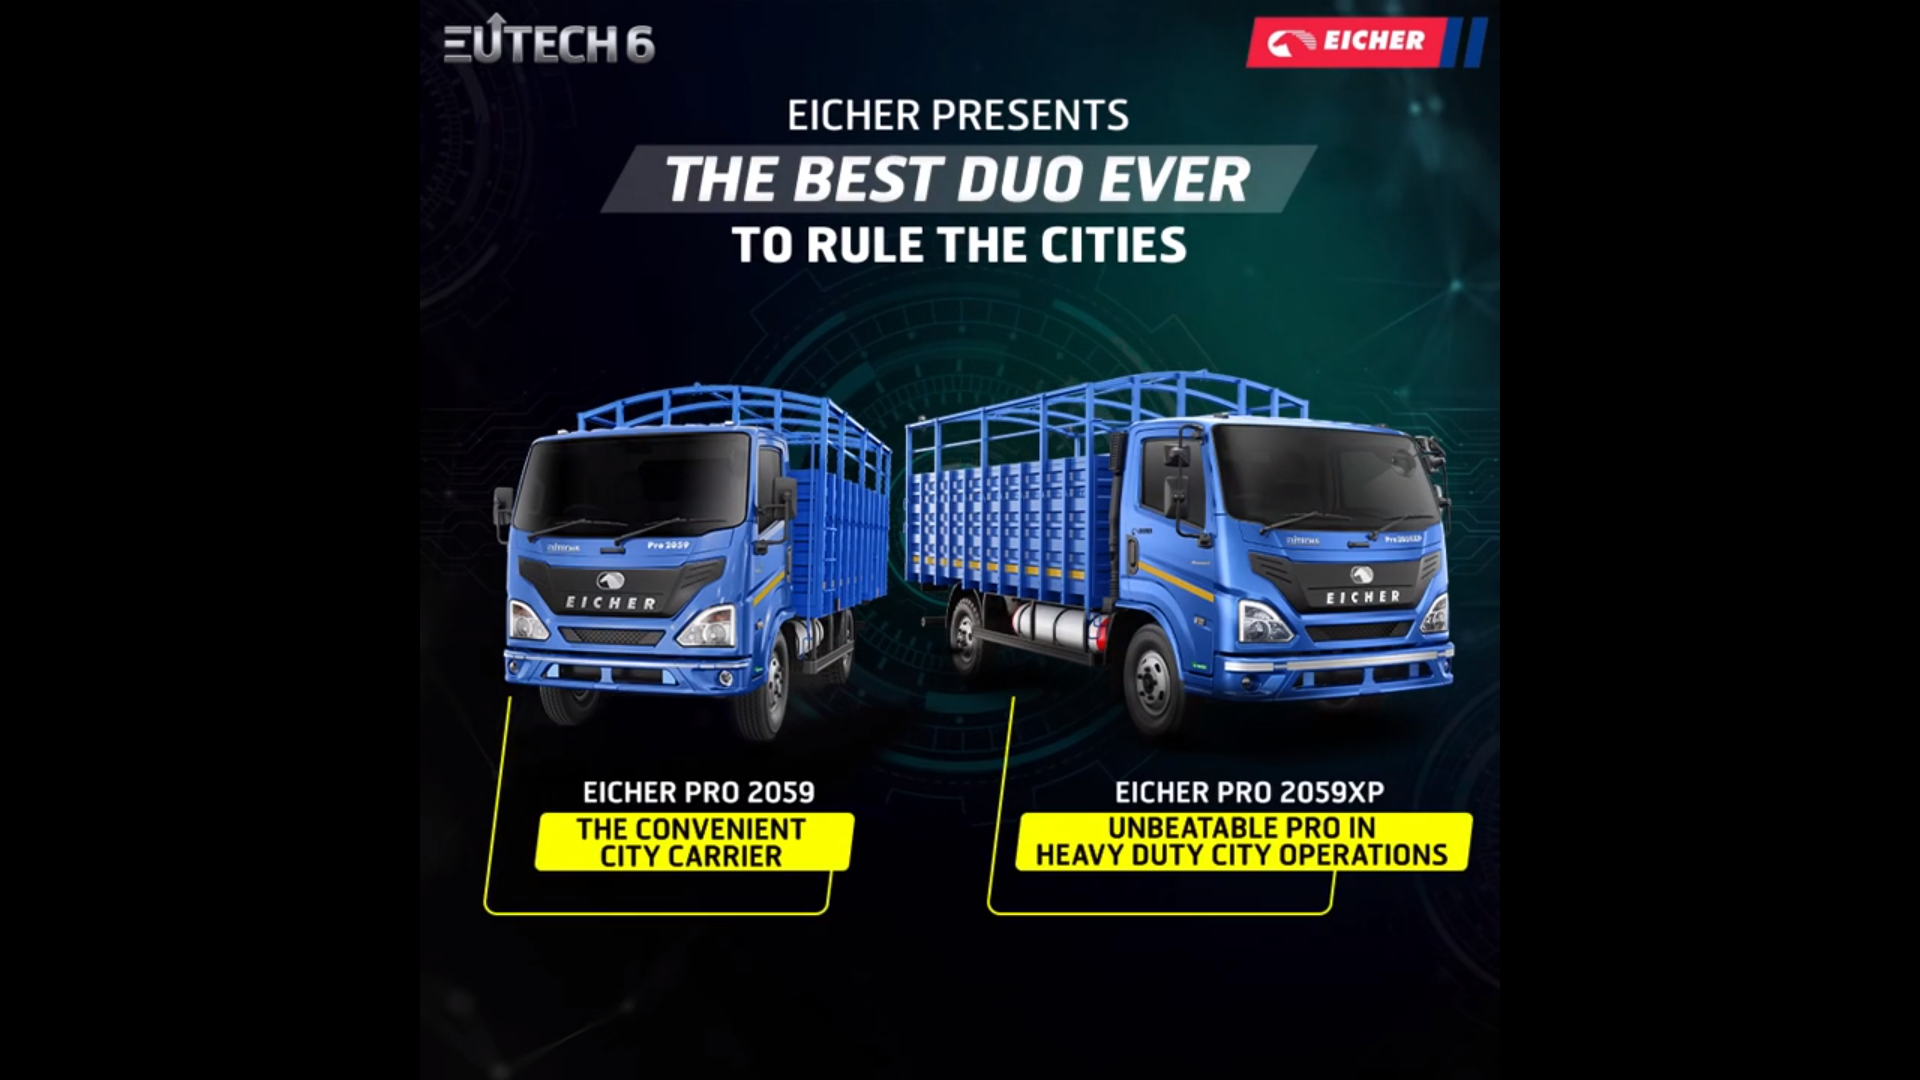 Eicher Pro 2059 and 2059XP